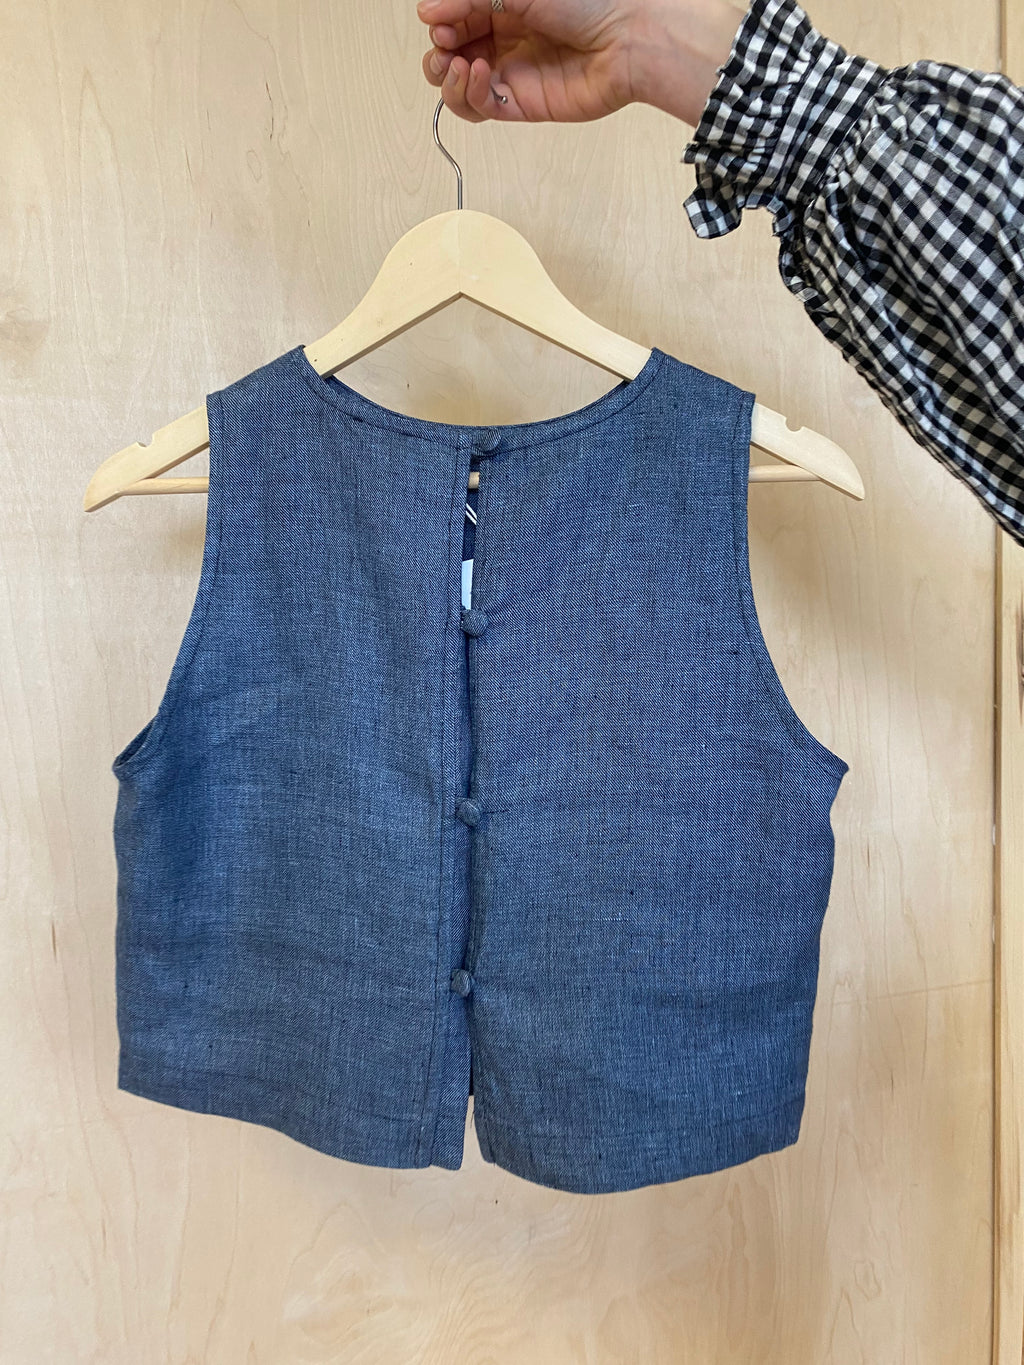 Bow embroidered vest top, size small, Sample Sale